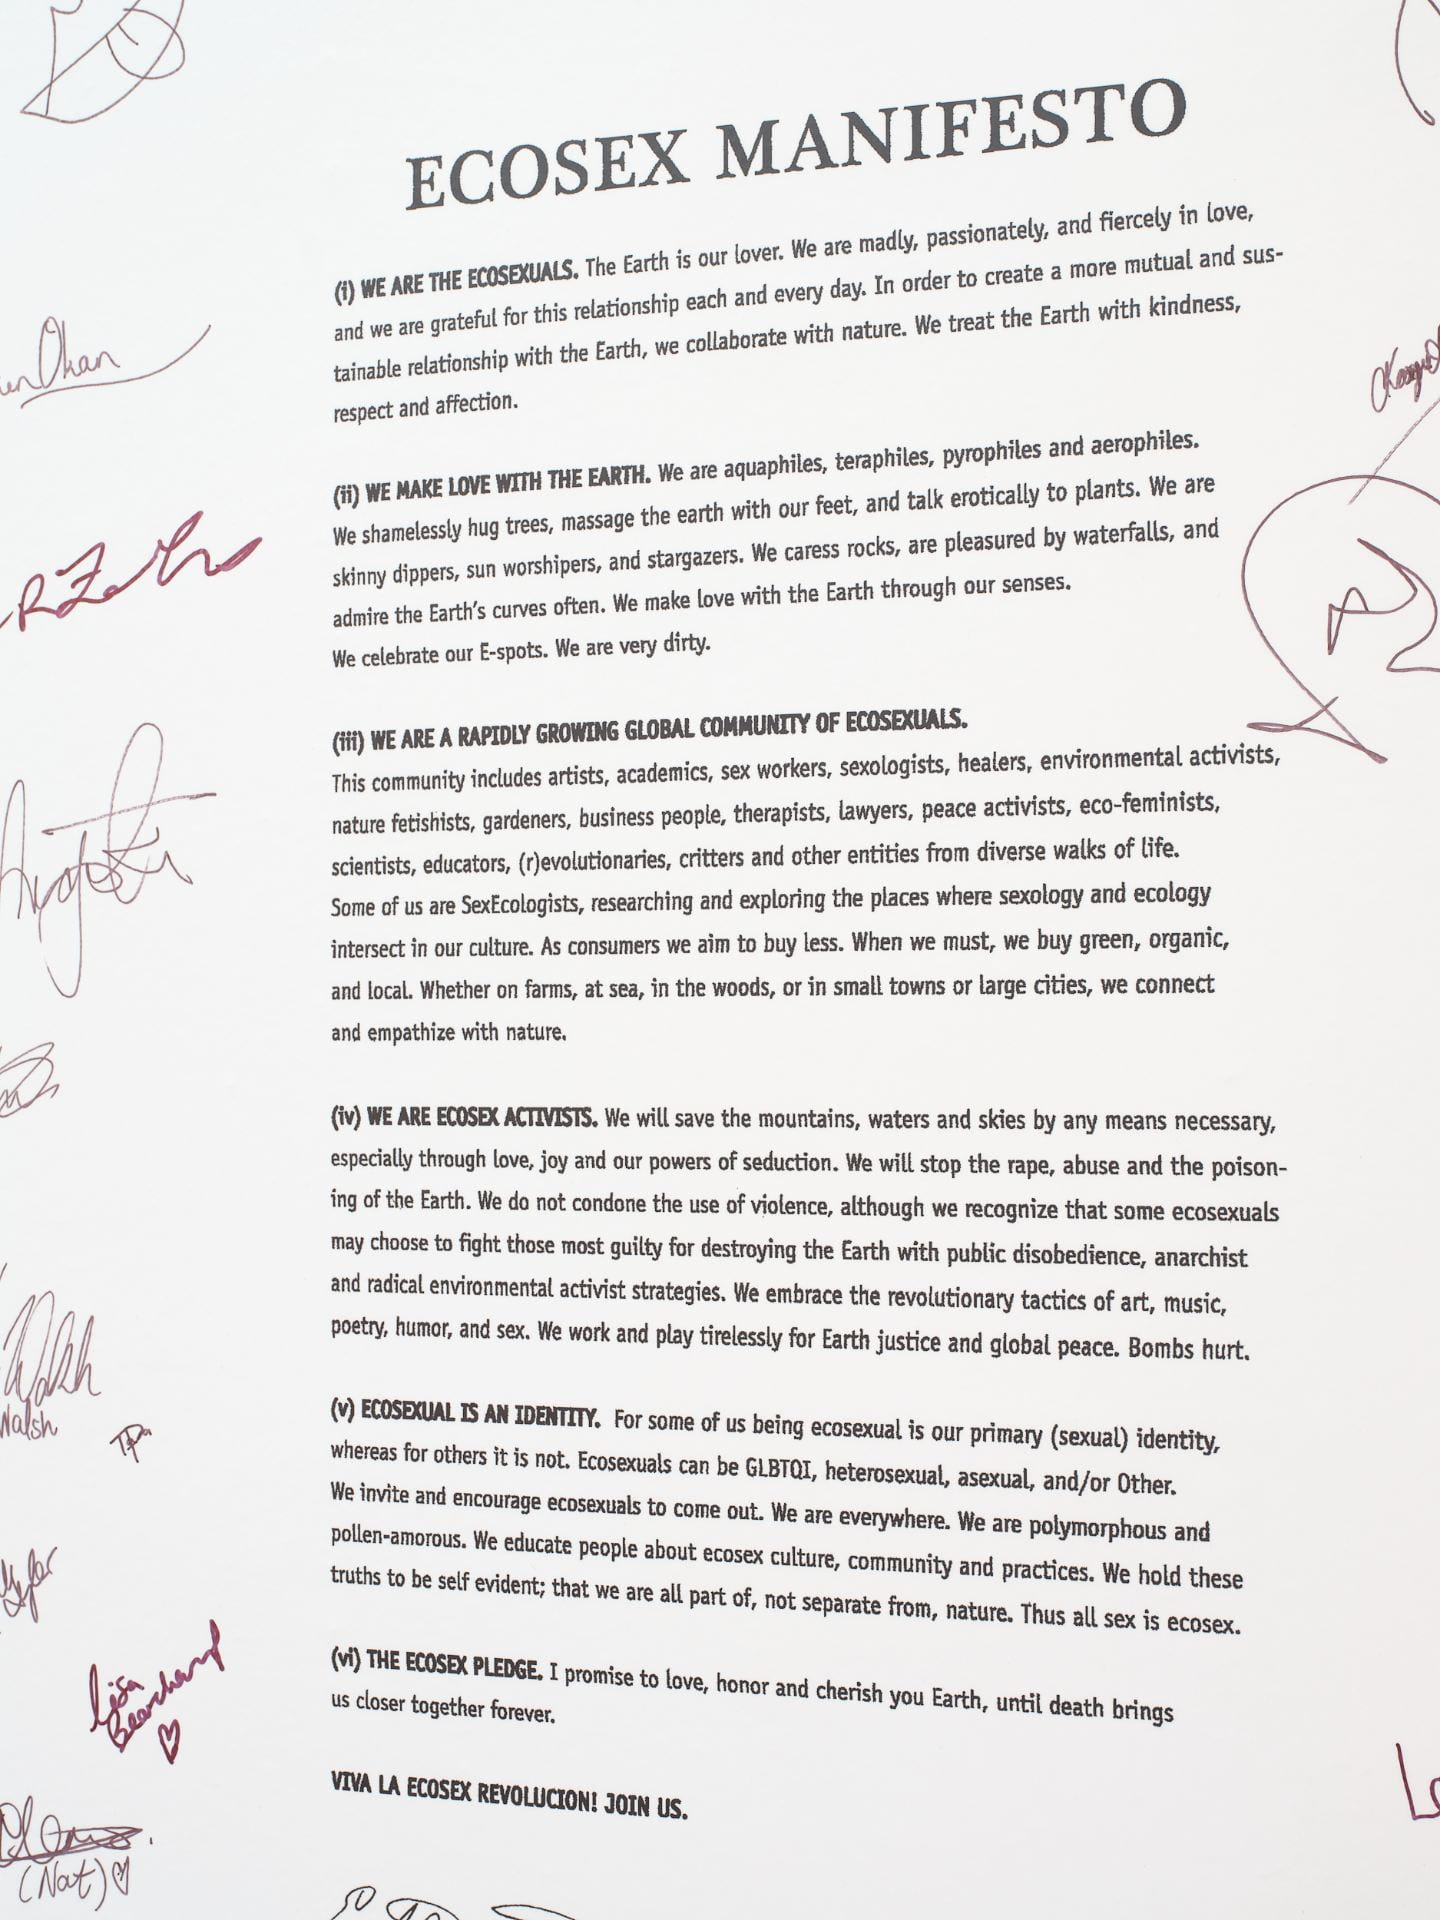 A piece of printed text on a wall, titled 'Ecosex Manifesto'. There are multiple signatures around the manifesto.